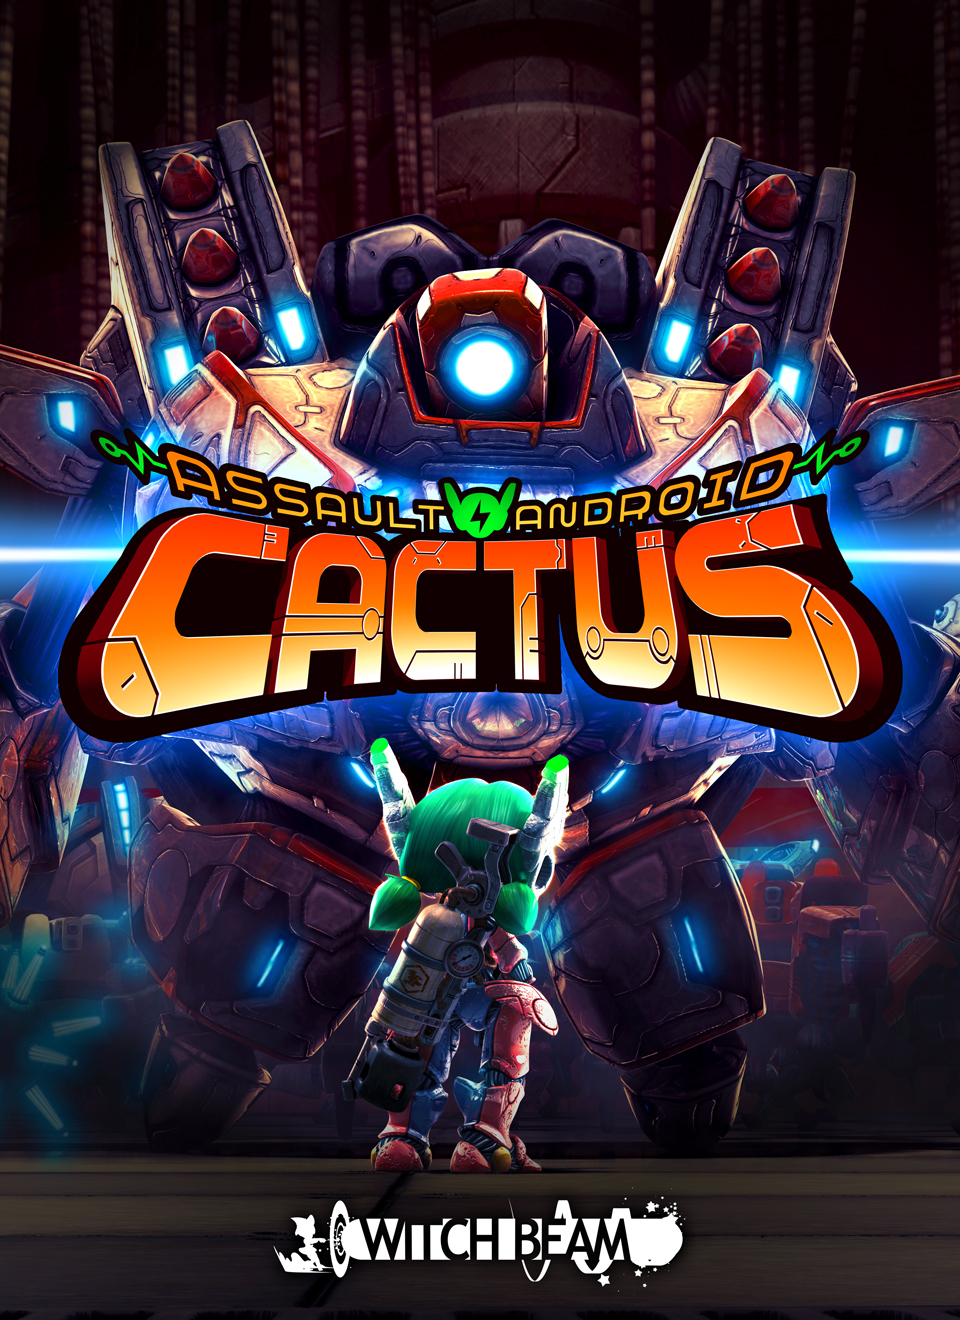 assault android cactus ps4 download free